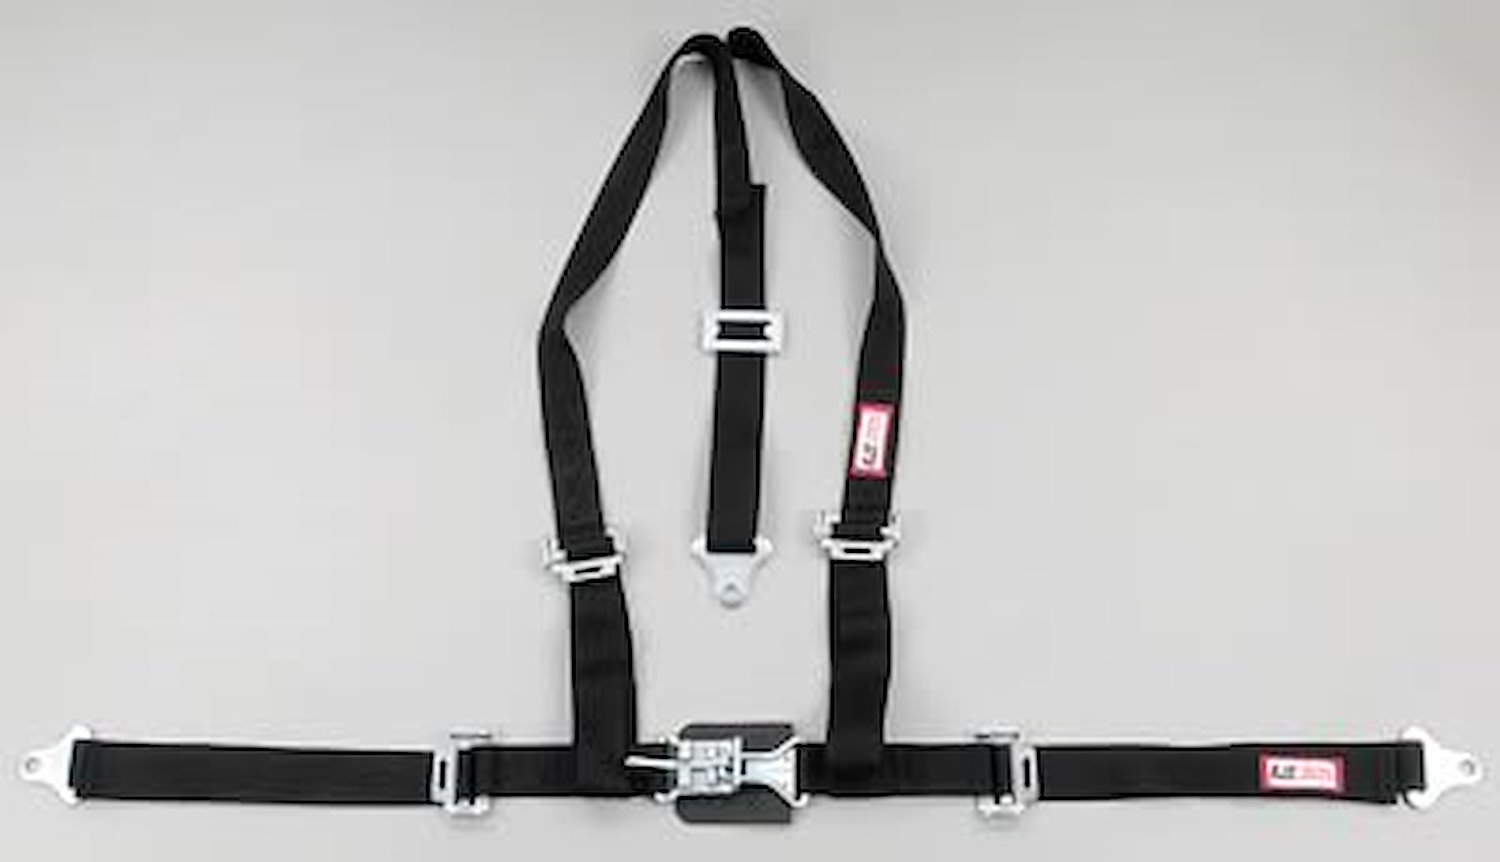 NON-SFI L&L HARNESS 2 PULL DOWN Lap Belt w/Adjuster 2 S.H. Y FLOOR Mount ALL WRAP ENDS RED